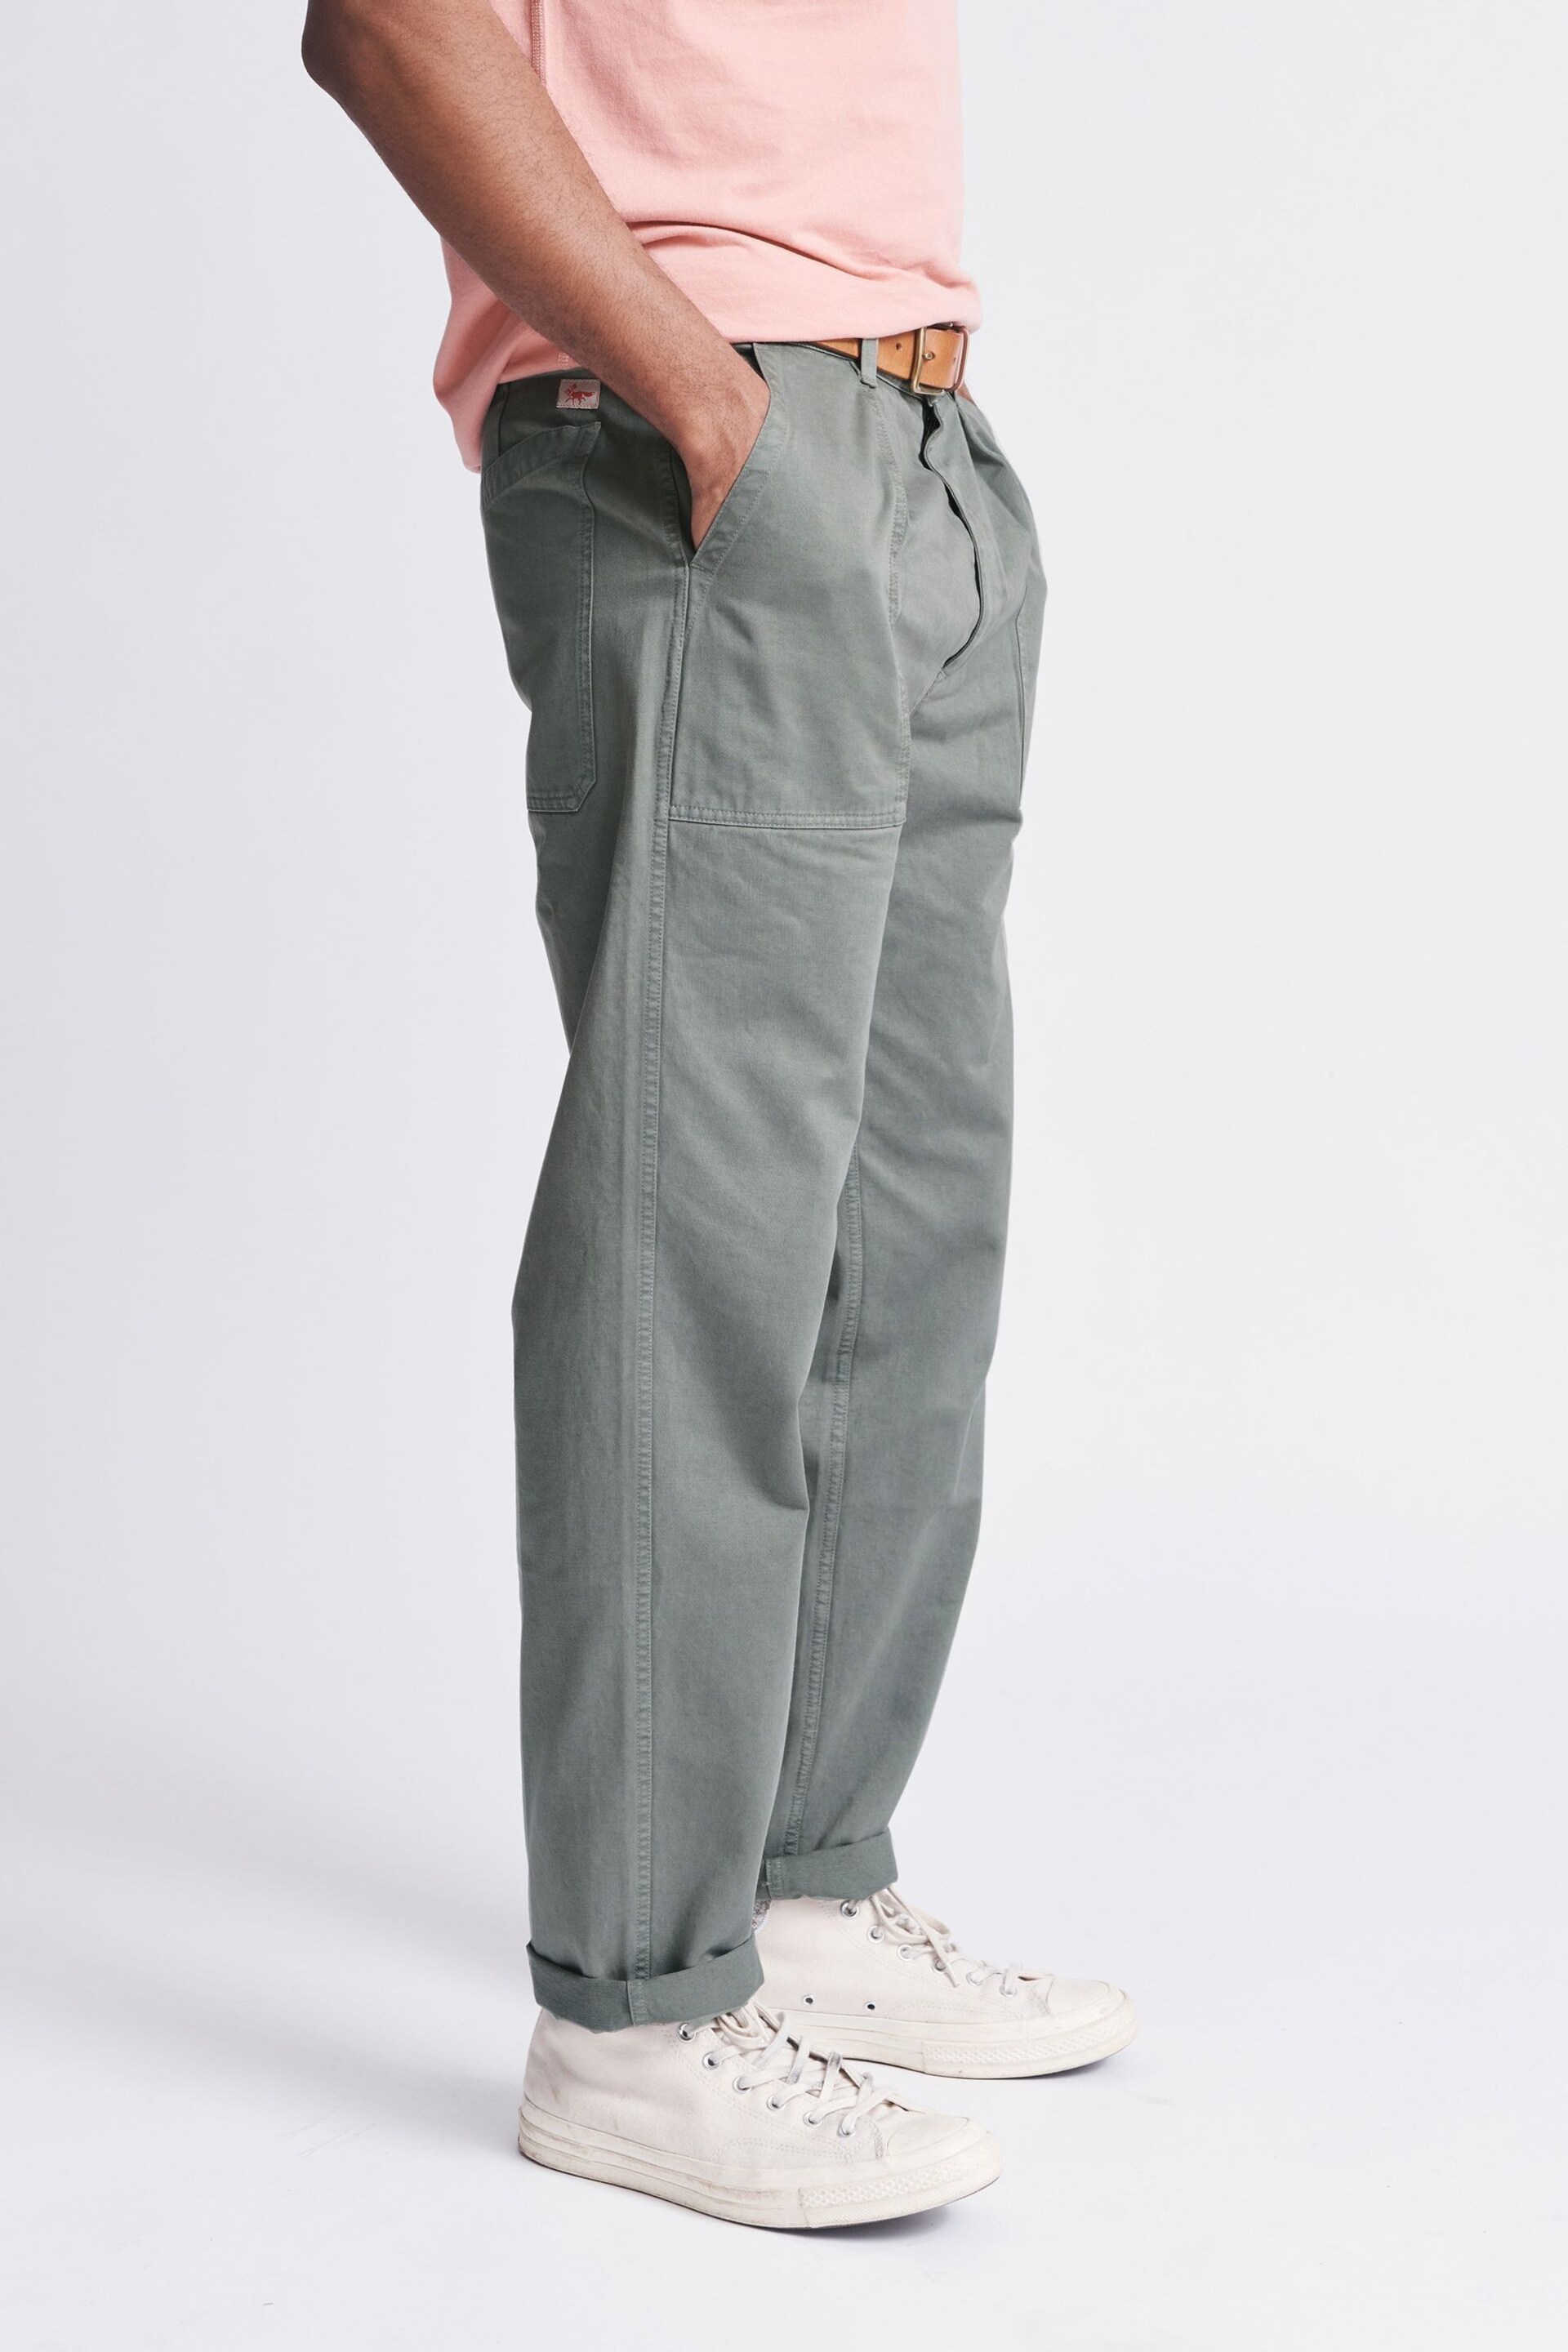 Aubin Beck Military Trousers - Image 3 of 6